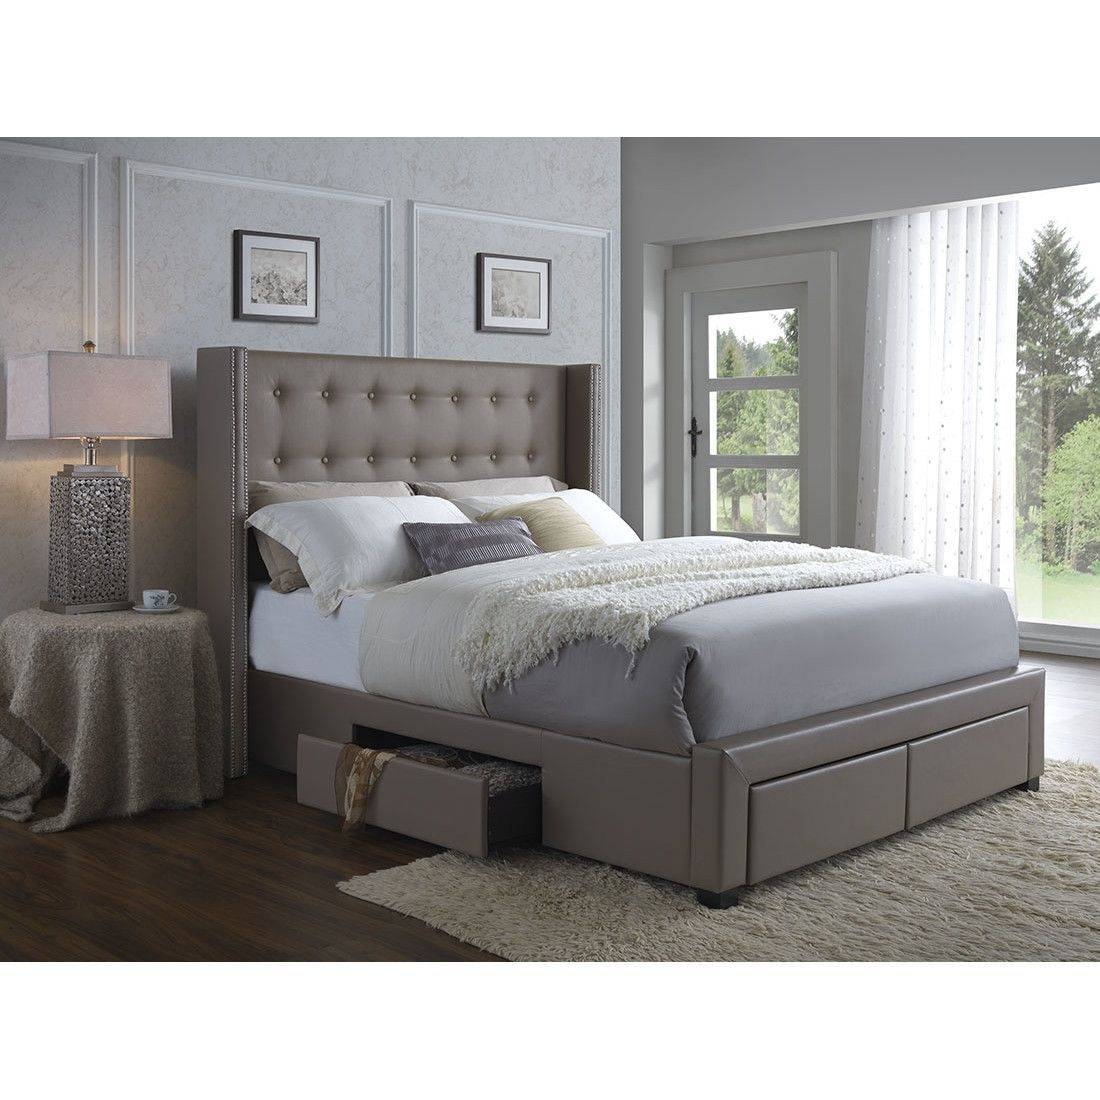 Queen Bed With Storage Drawers Underneath Hotsell, 57% OFF |  www.ingeniovirtual.com